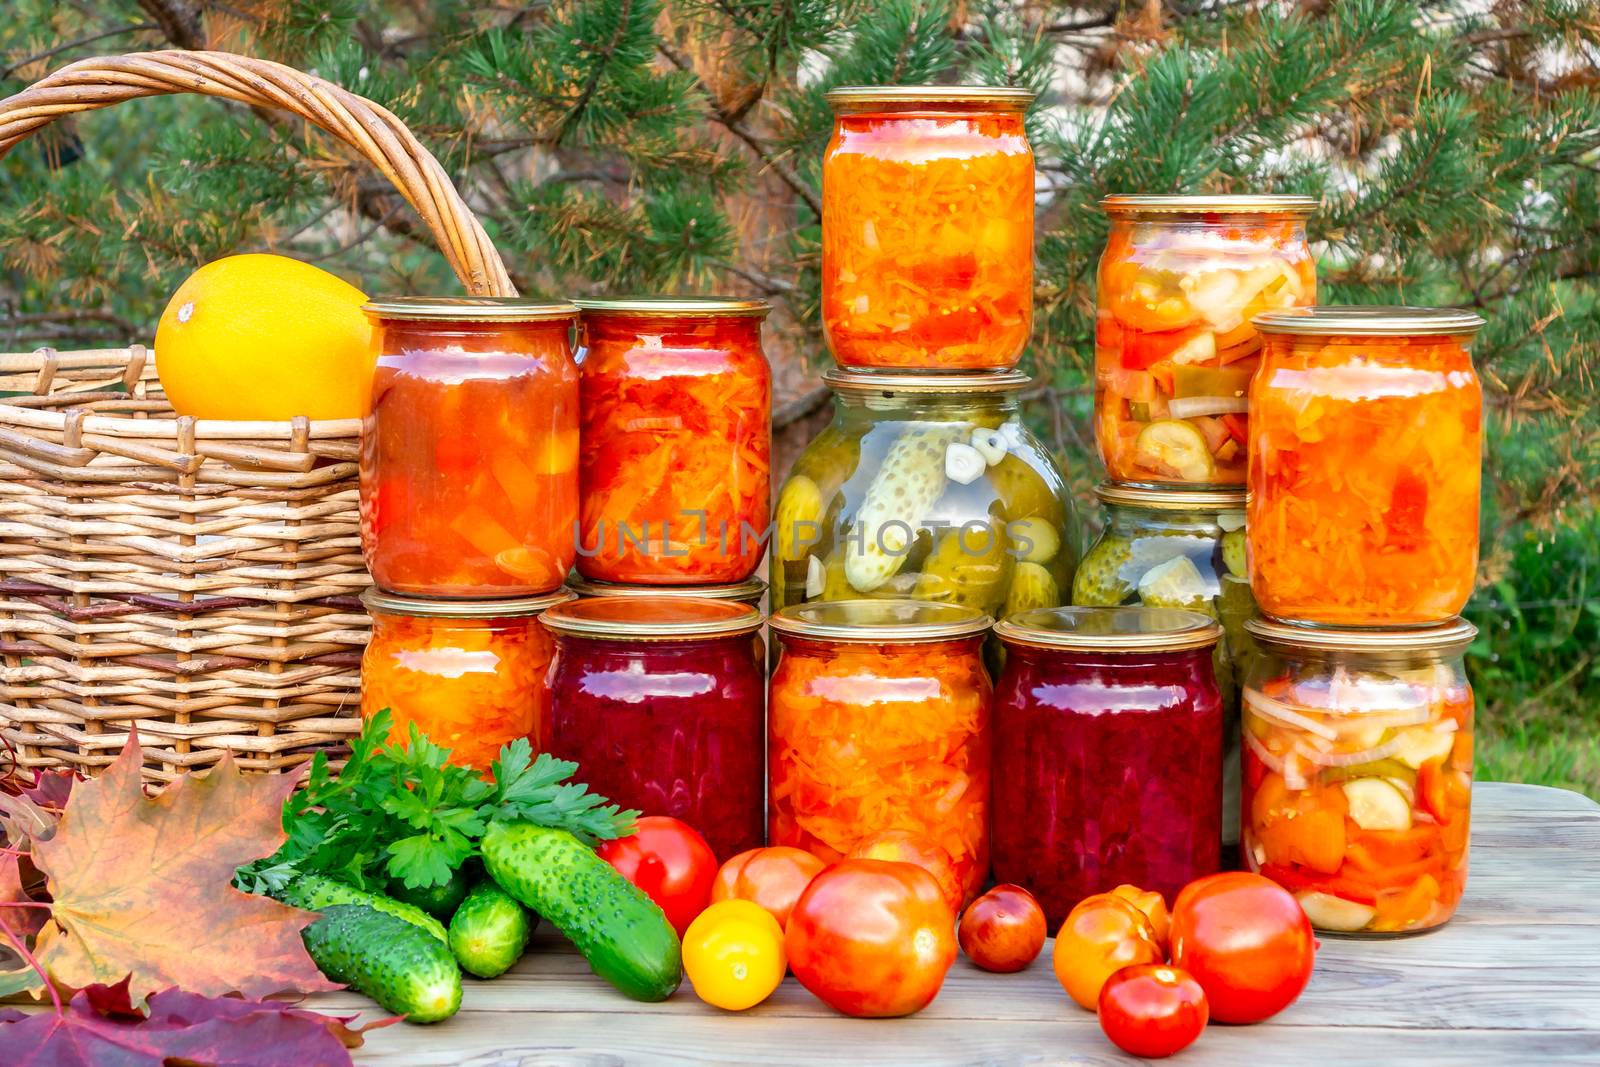 Several homemade jars of canned vegetables and fresh vegetables on a wooden table - image.